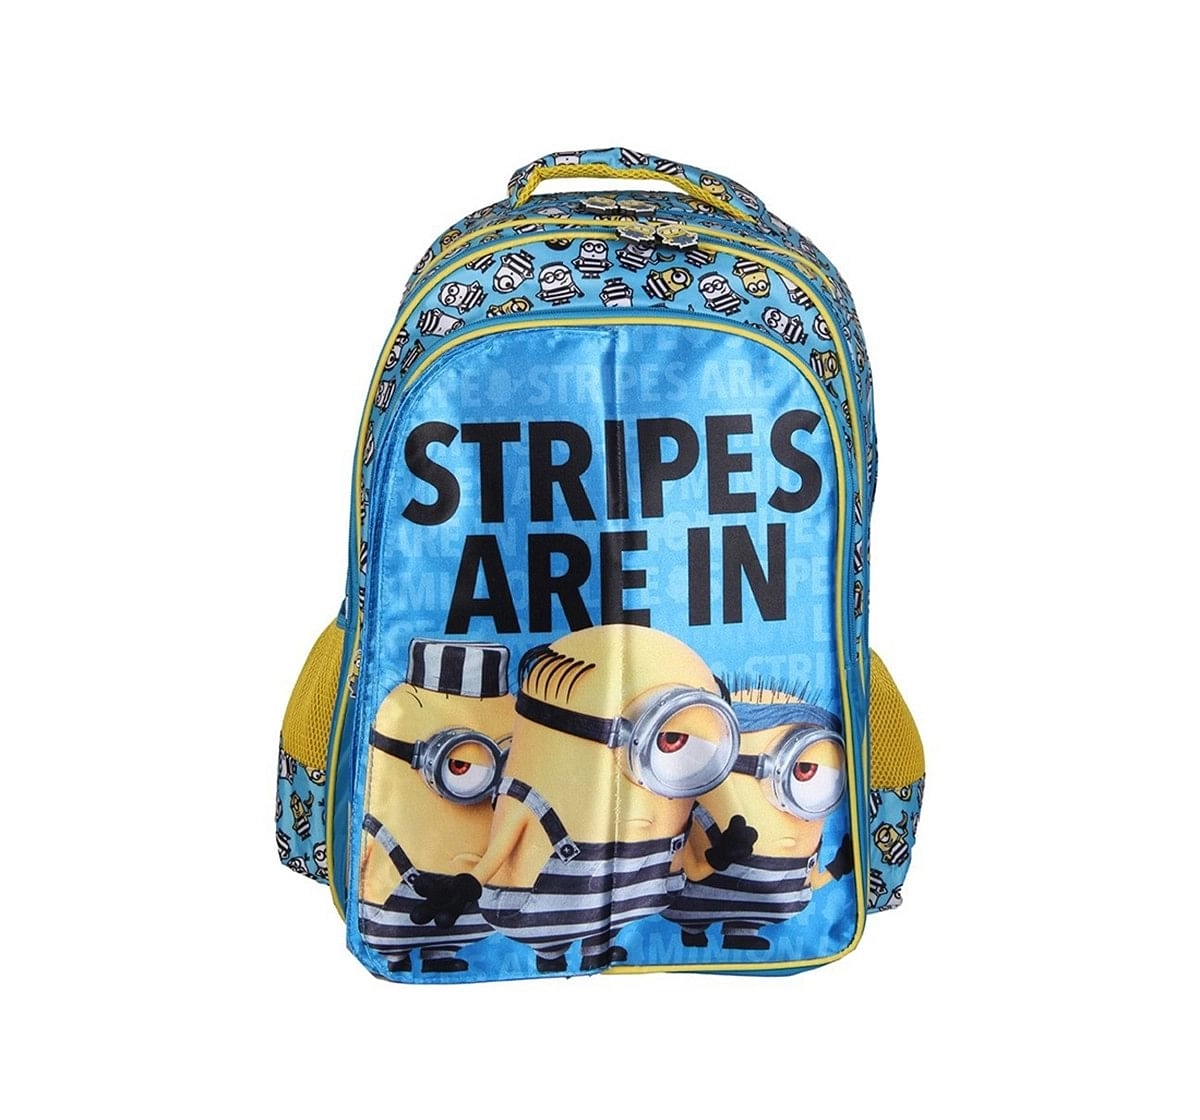 Minions Despicable Me 2 Bag for Kids age 3Y+ 